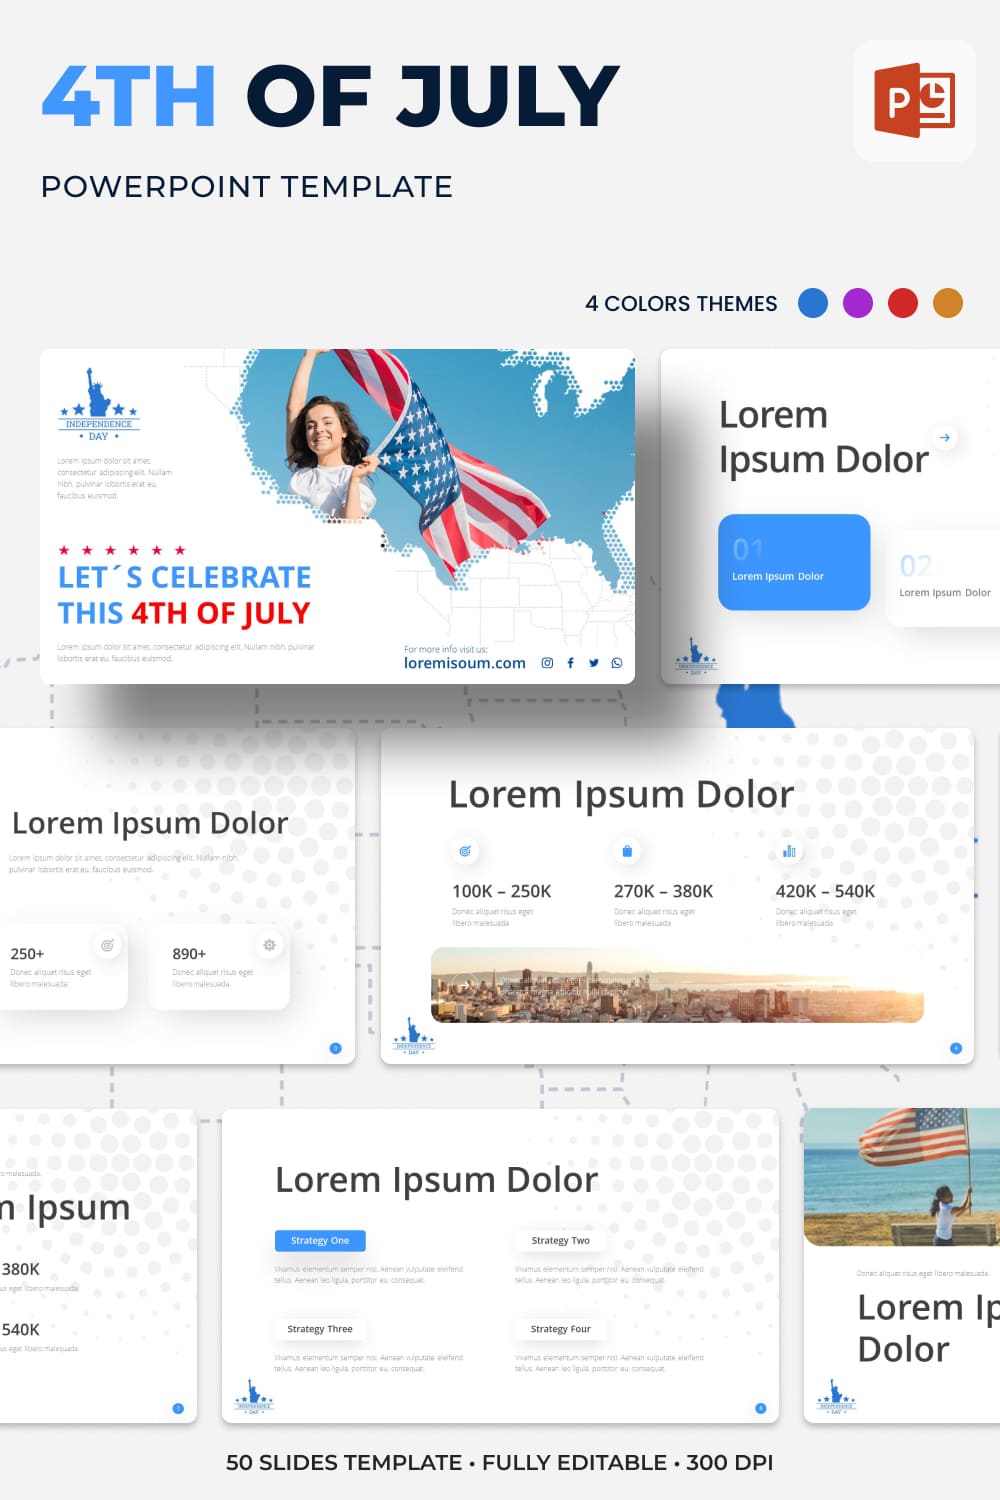 4th Of July Powerpoint Template - Pinterest.